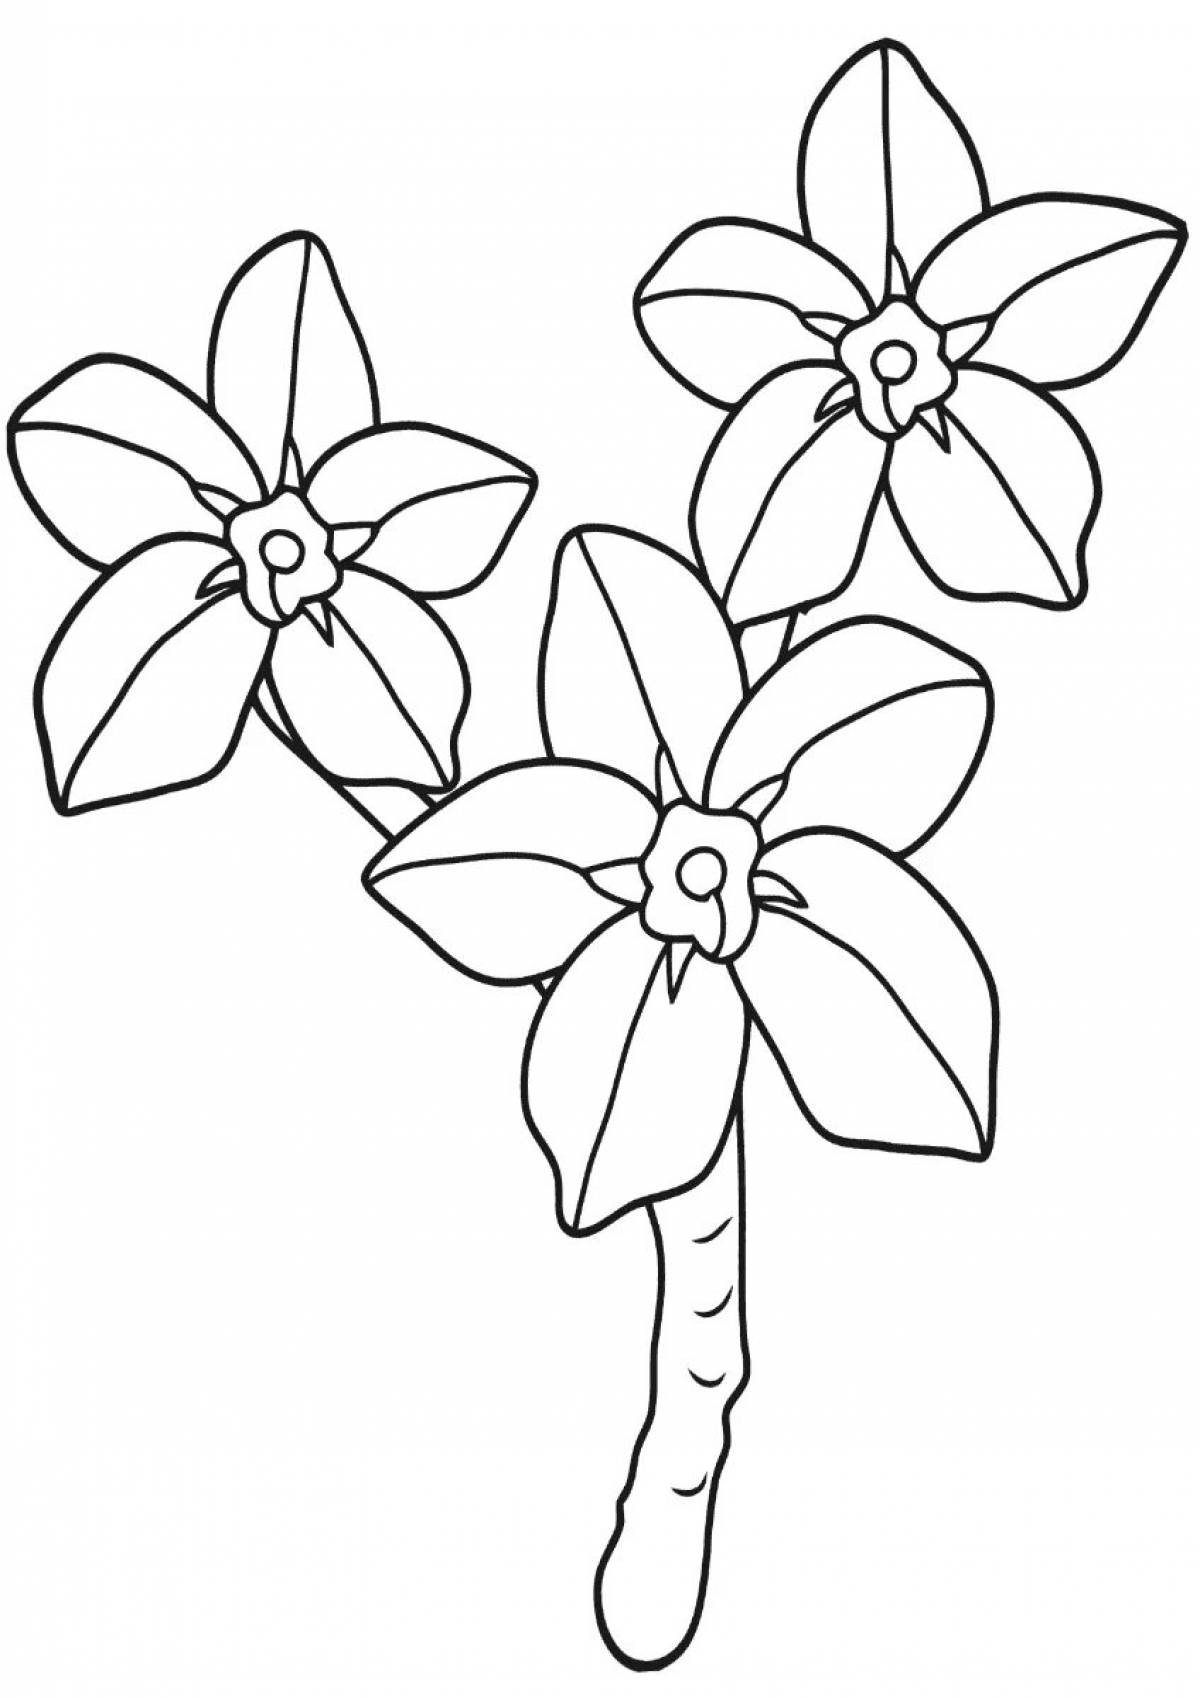 Artistic forget-me-not flower coloring book